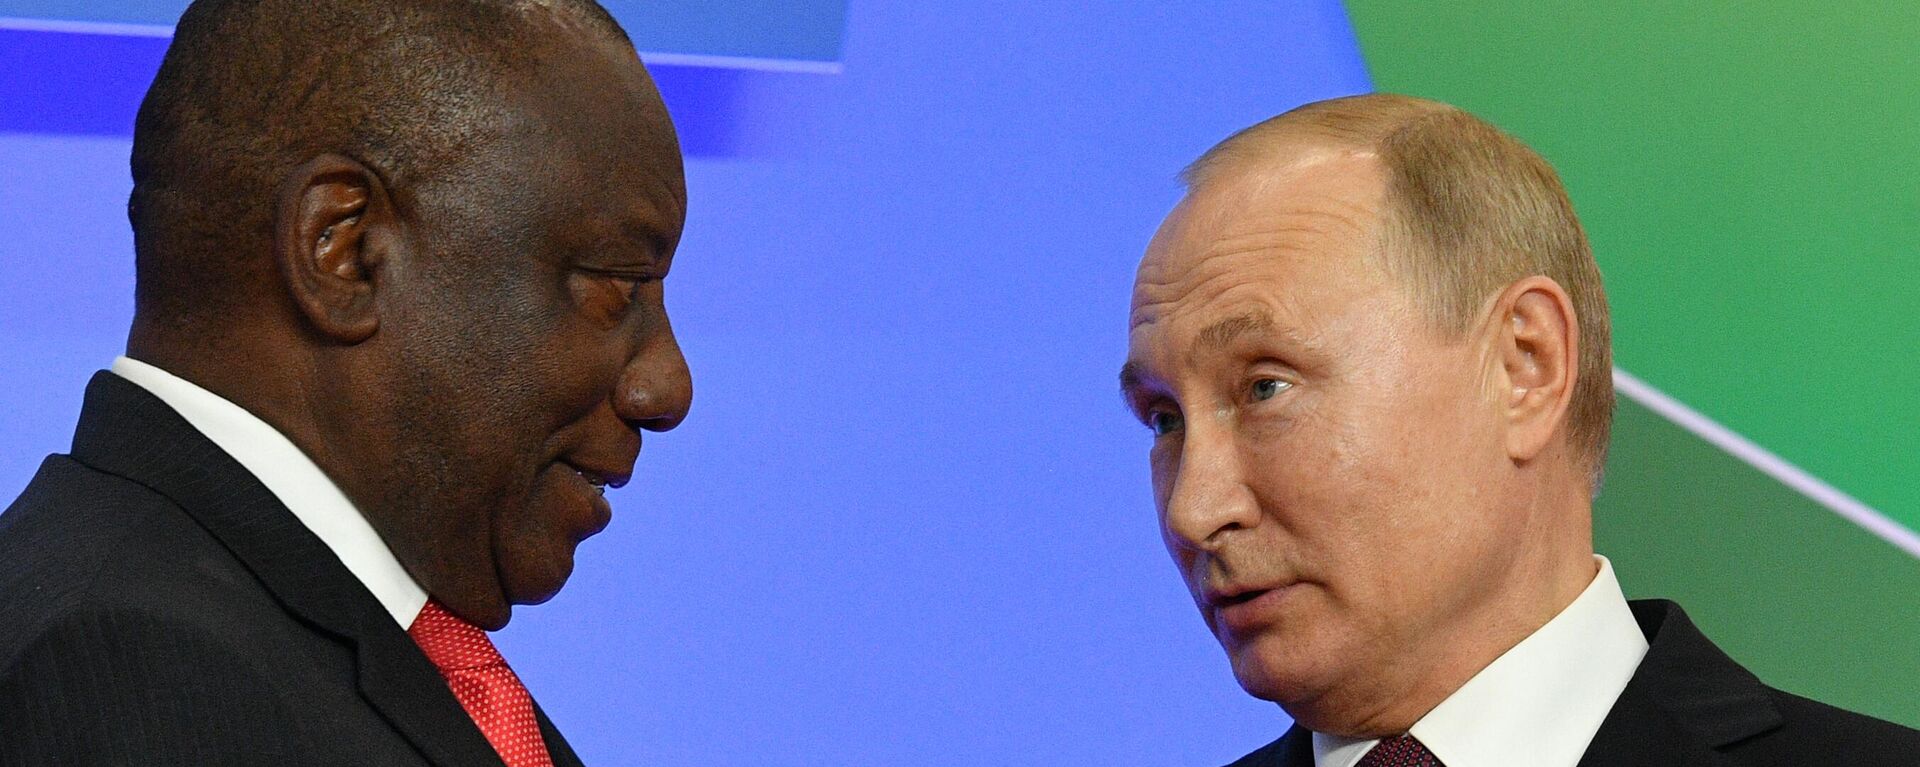 Russian President Vladimir Putin and South African President Cyril Ramaphosa attend an official welcome ceremony for heads of state and government at the 2019 Russia-Africa Summit and Economic Forum in Sochi, Russia. 23.10.19 - Sputnik Africa, 1920, 27.05.2023